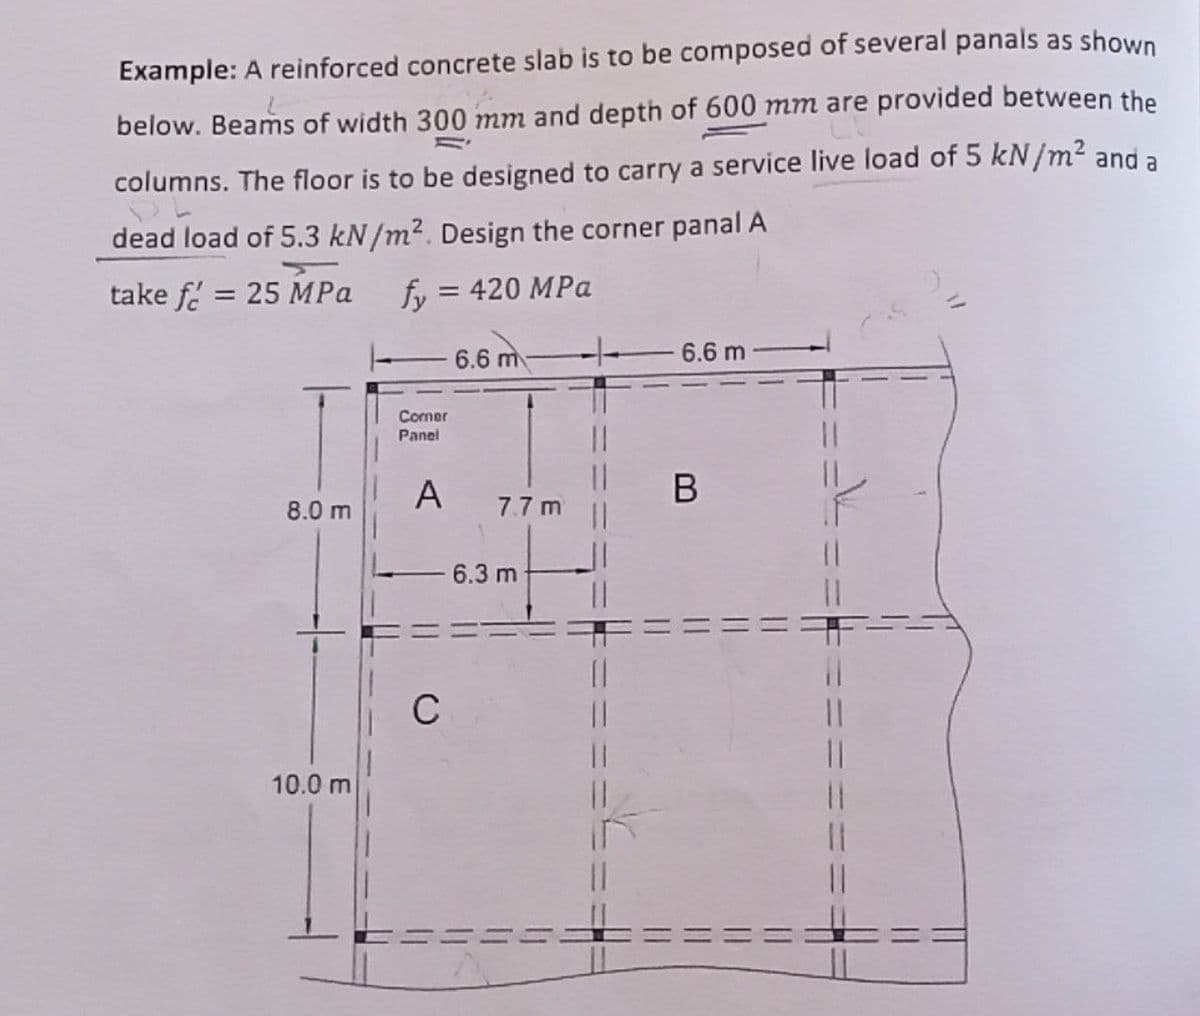 Example: A reinforced concrete slab is to be composed of several panals as shown
below. Beams of width 300 mm and depth of 600 mm are provided between the
columns. The floor is to be designed to carry a service live load of 5 kN/m² and a
dead load of 5.3 kN/m². Design the corner panal A
take f= 25 MPa
fy = 420 MPa
6.6 m
6.6 m
Corner
Panel
A
8.0 m
10.0 m
7.7 m
- 6.3 m
C
11
||
B
||
11